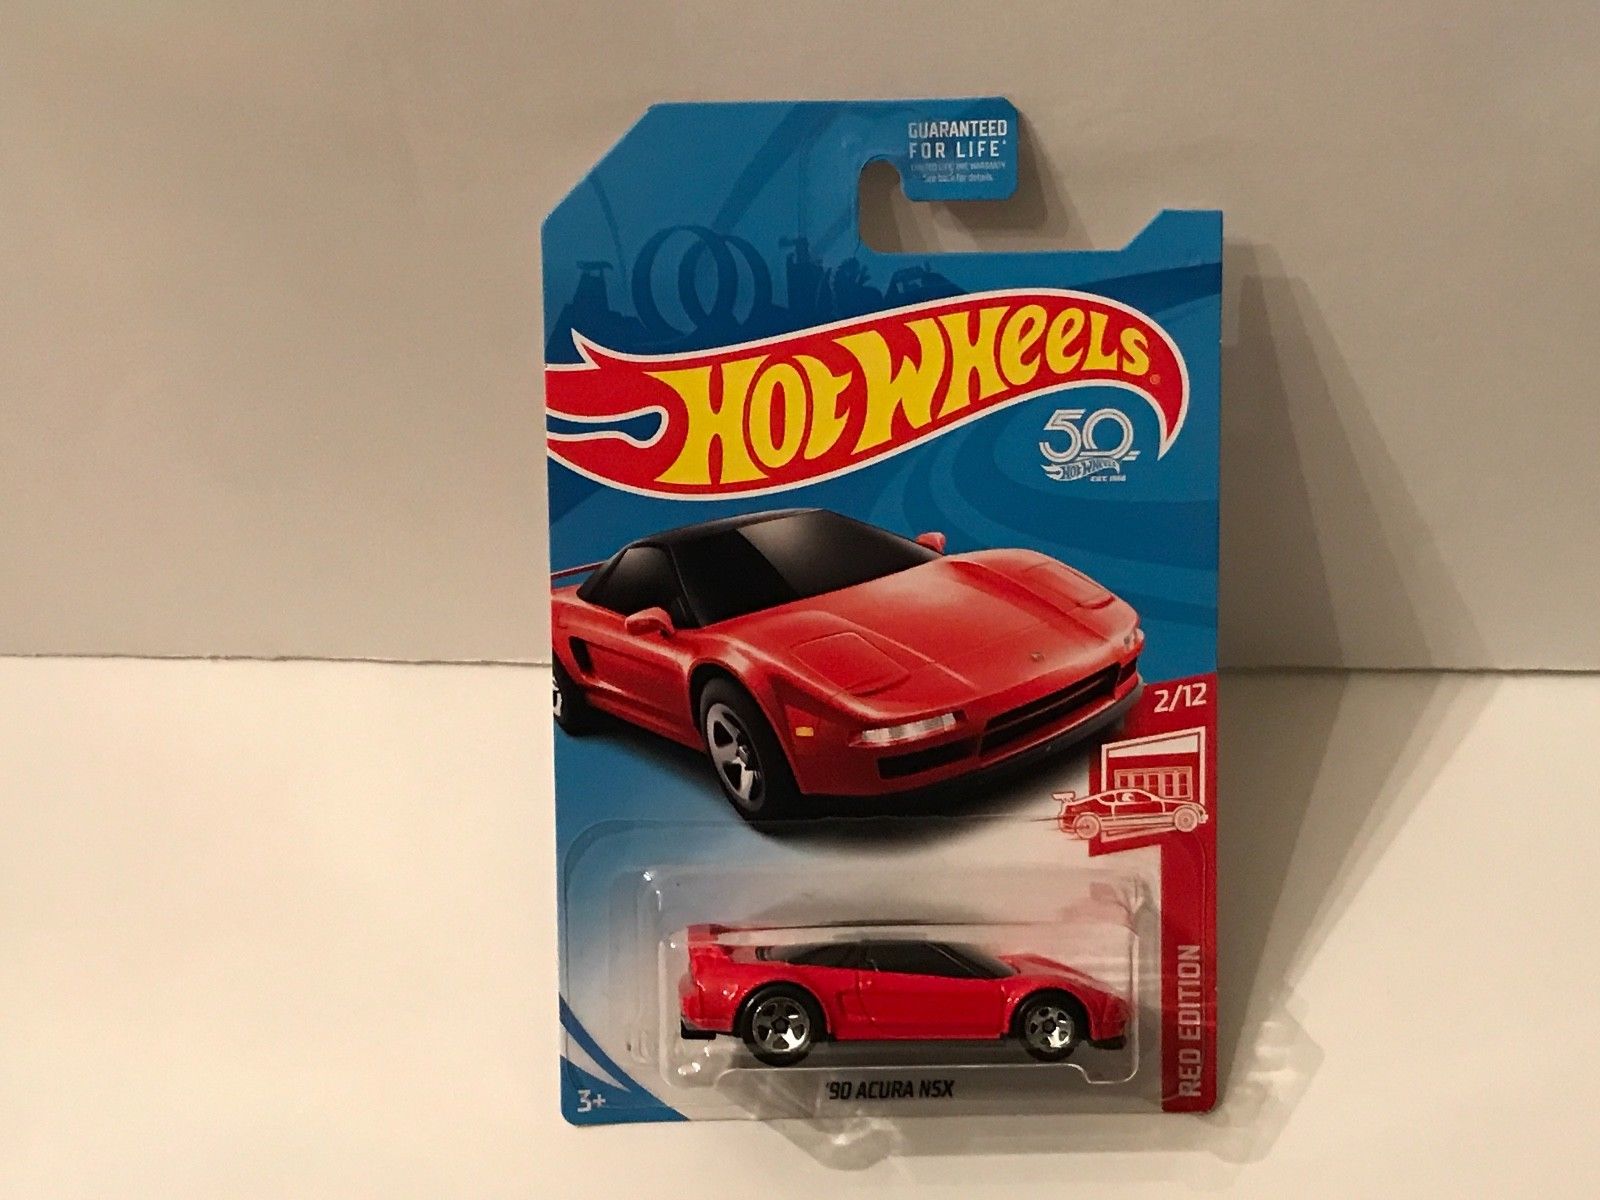 2019 hot wheels target red edition